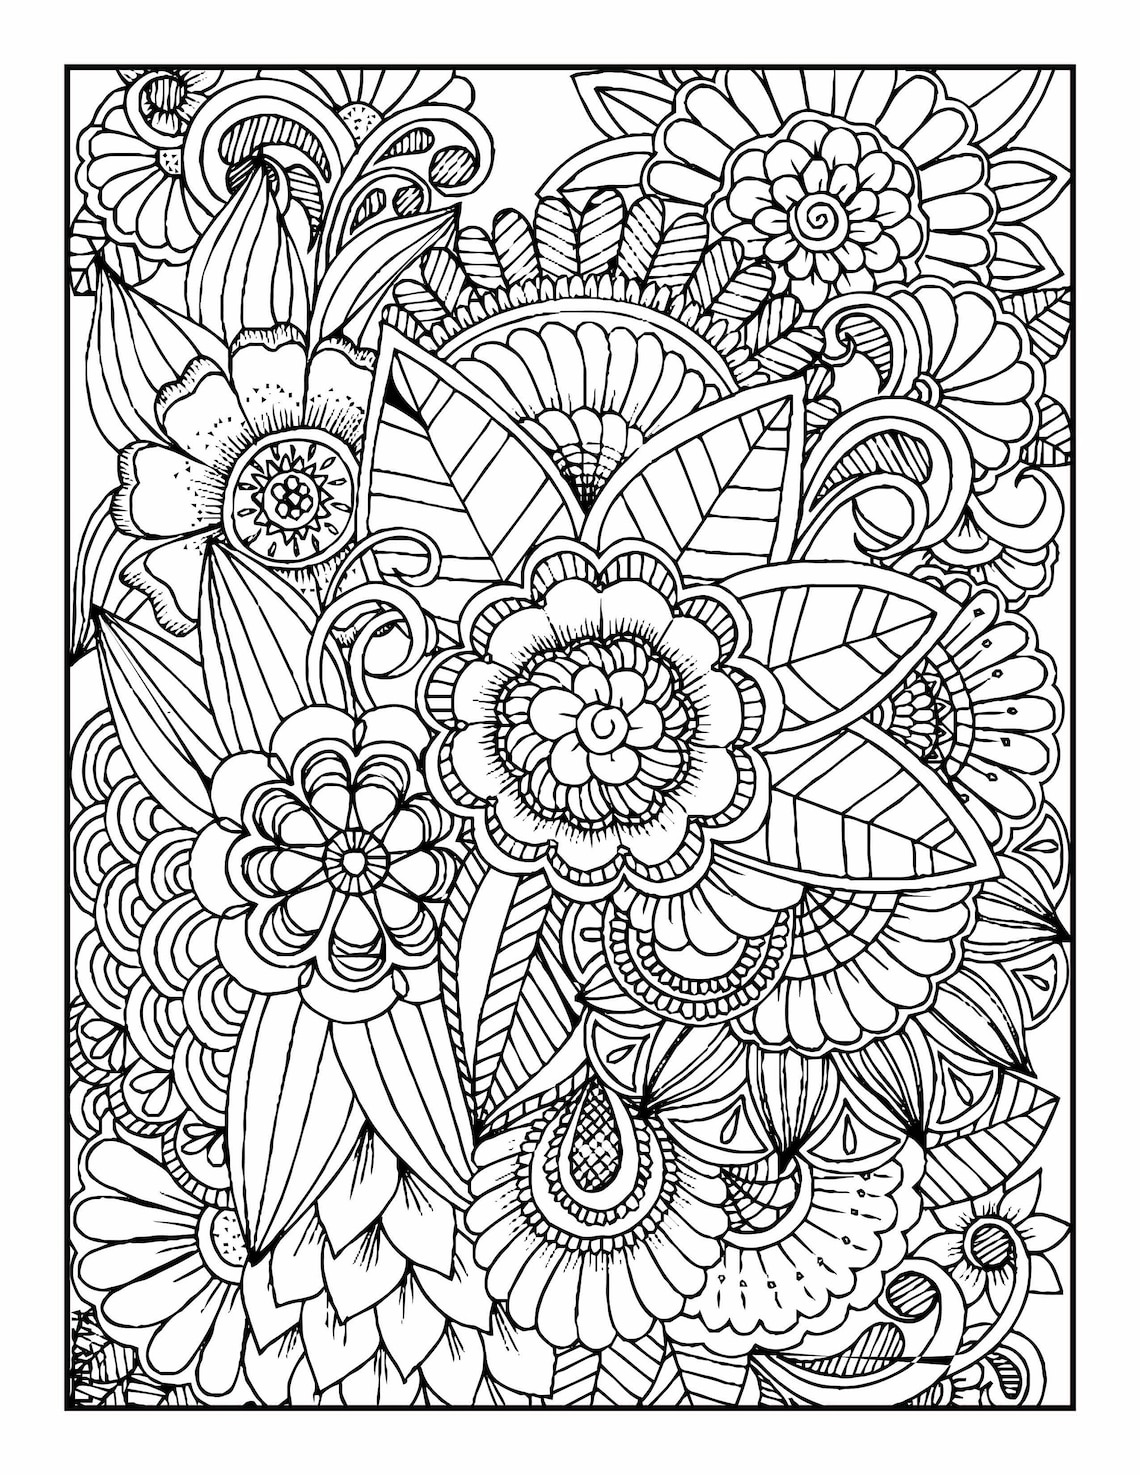 Coloring Book Pages Set Fifteen Floral Designs 10 - Etsy